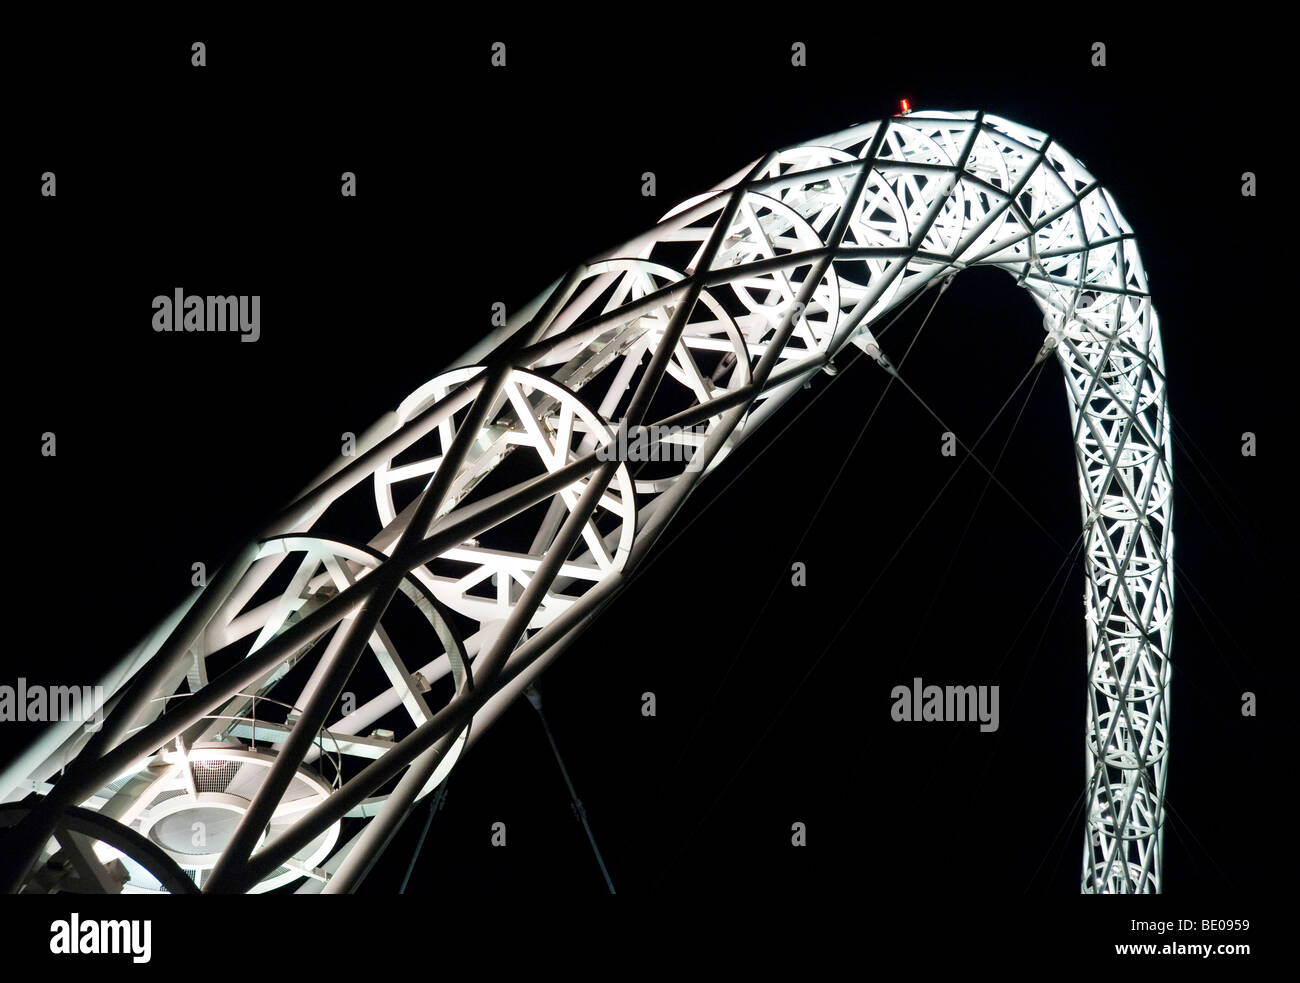 Wembley Stadion Arch in London England Stockfoto